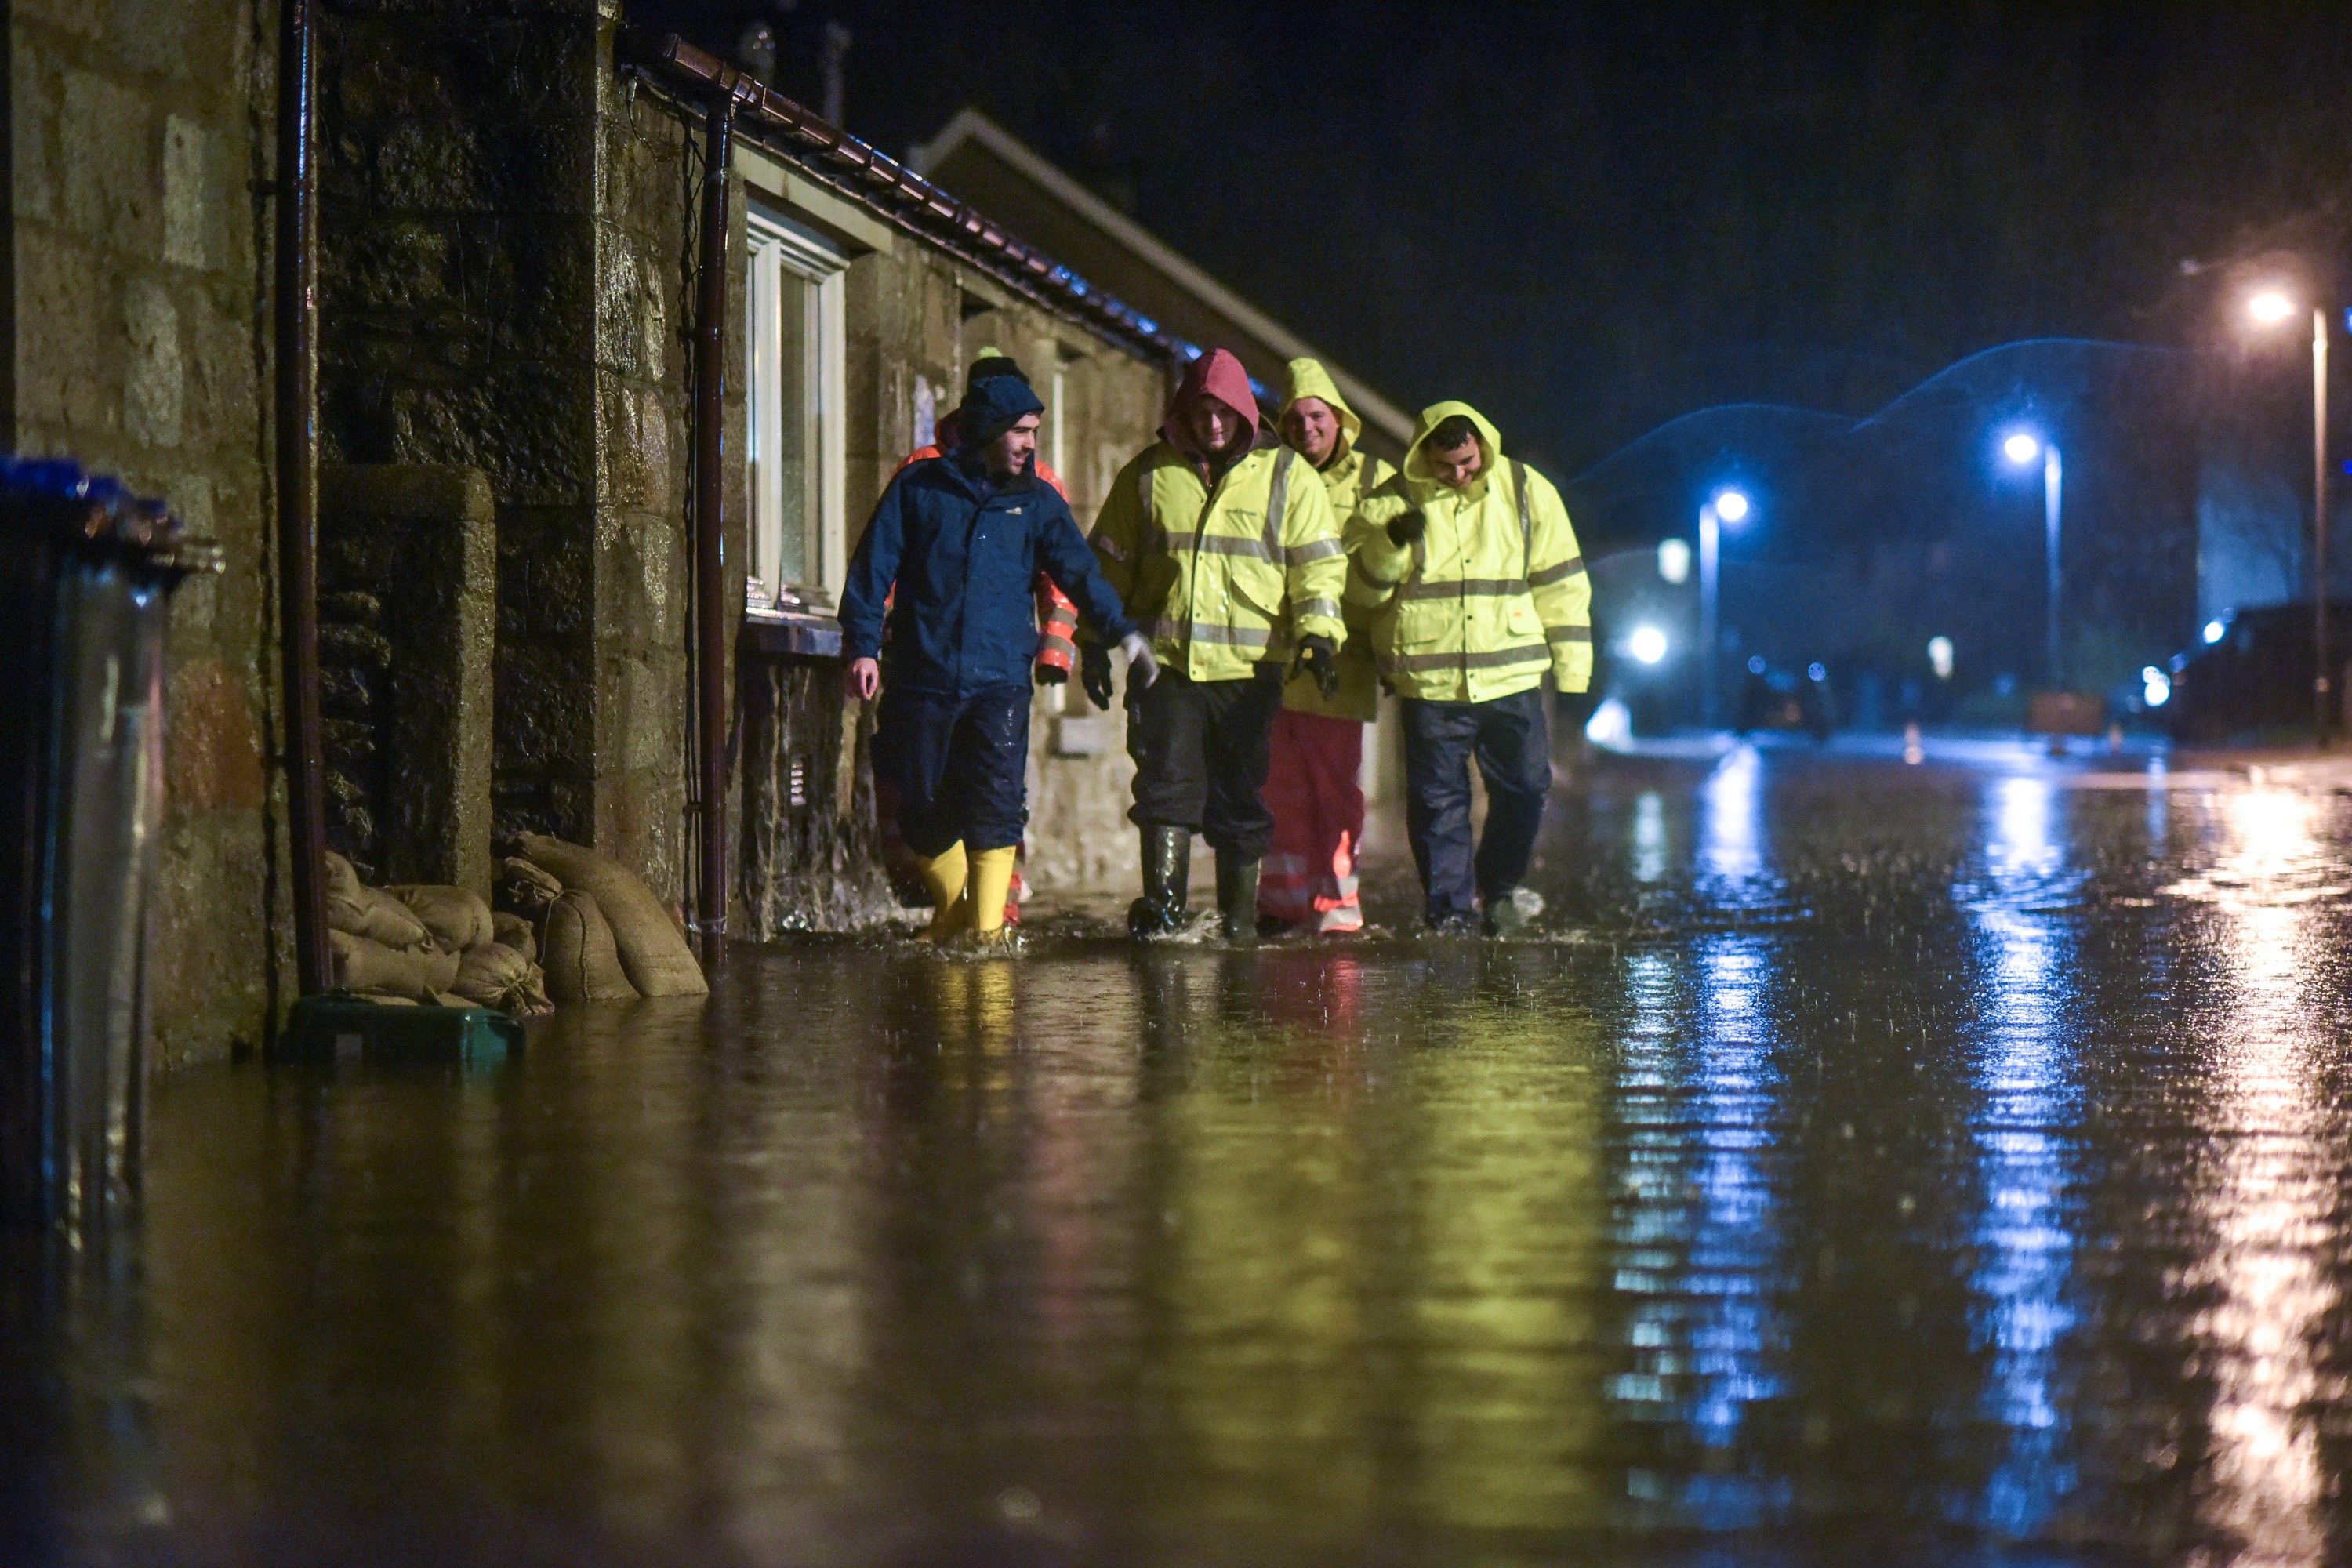 Men search homes in the Port Elphinstone area of Inverurie, Aberdeenshire as they begin to experience flooding after the River Don burst its banks on January 07 2016